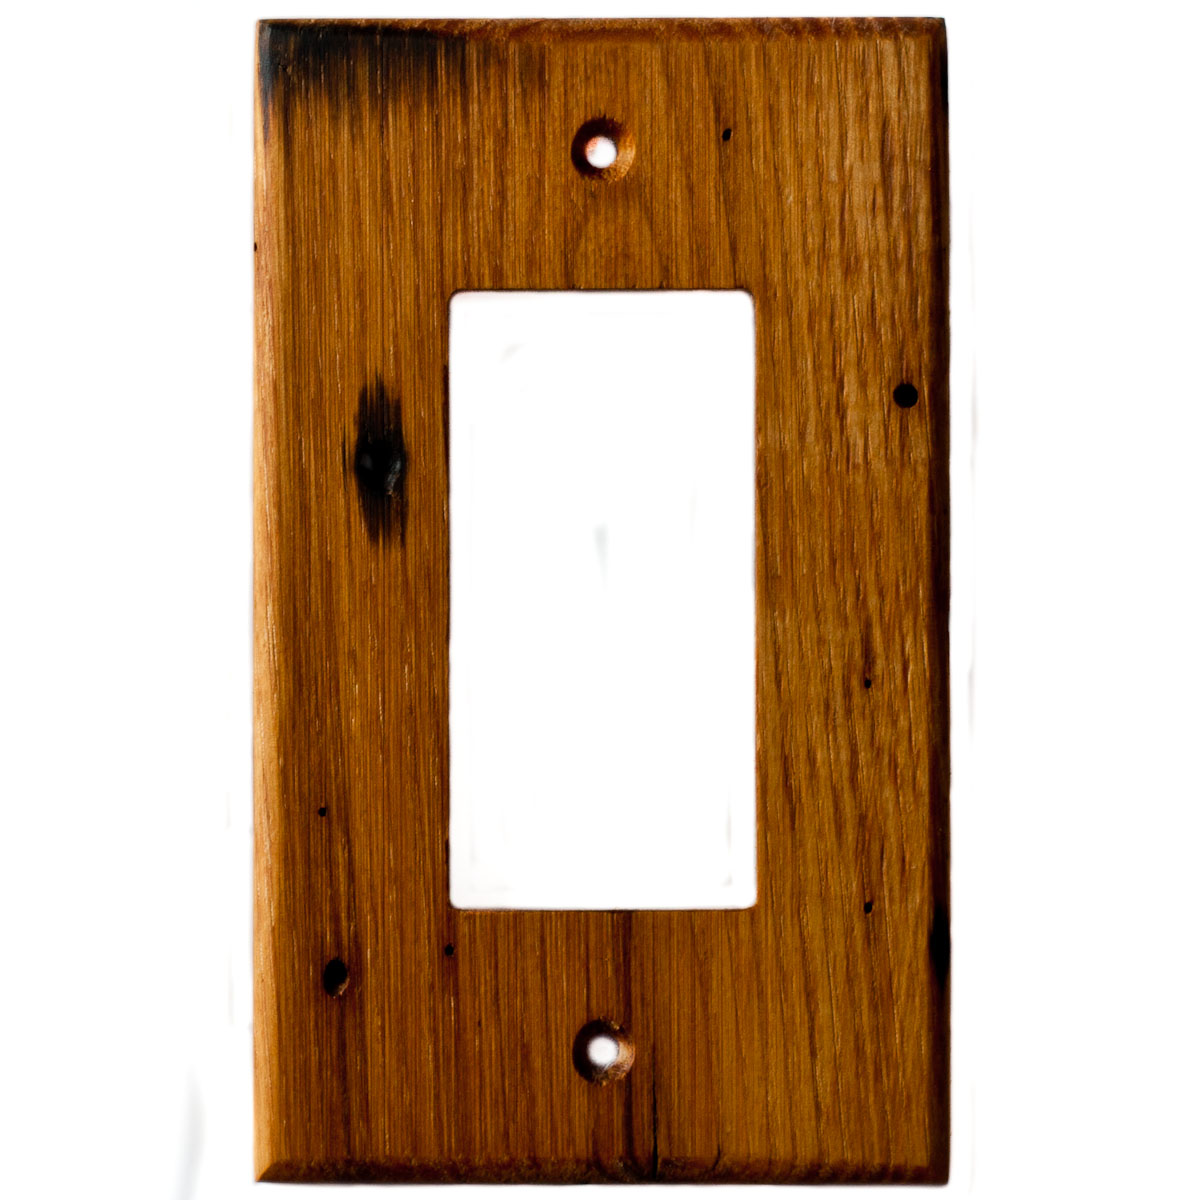 https://www.virgintimberlumber.com/wp-content/uploads/2022/06/reclaimed-wormy-chestnut-wood-wall-plate-1gang-GFCI-outlet-cover.jpg